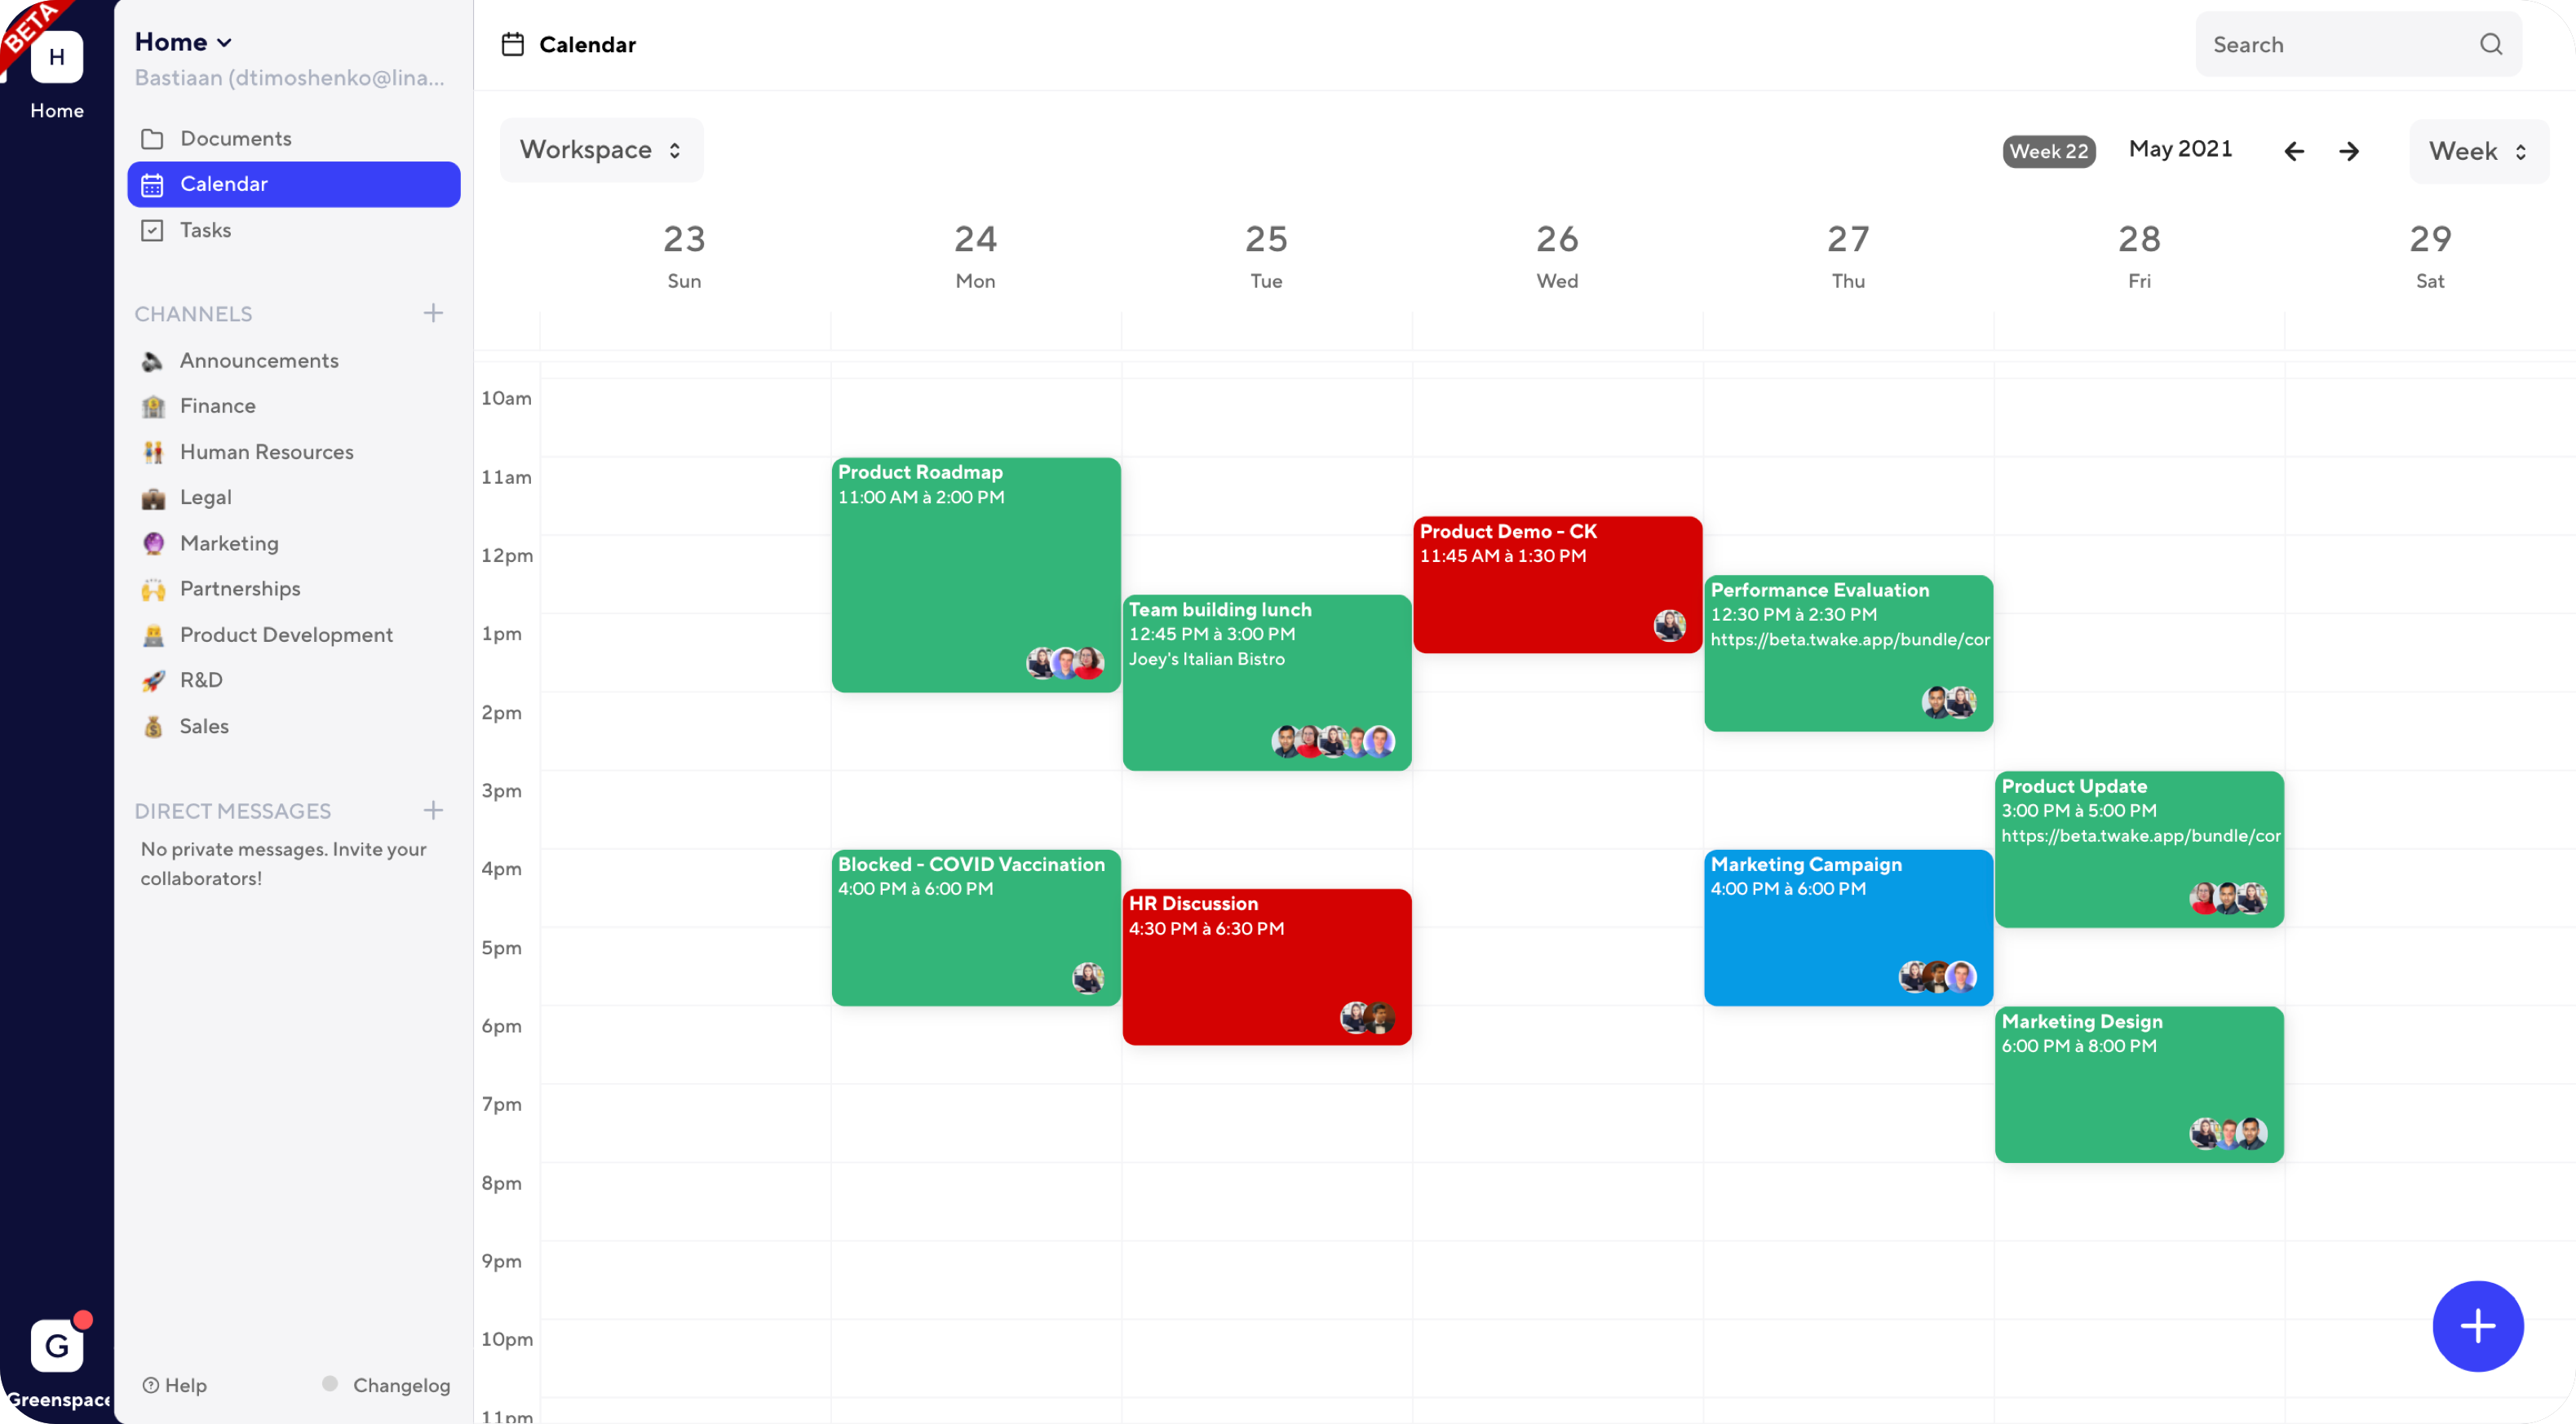 Plan your team events and have a quick look on what is your team up to during the week